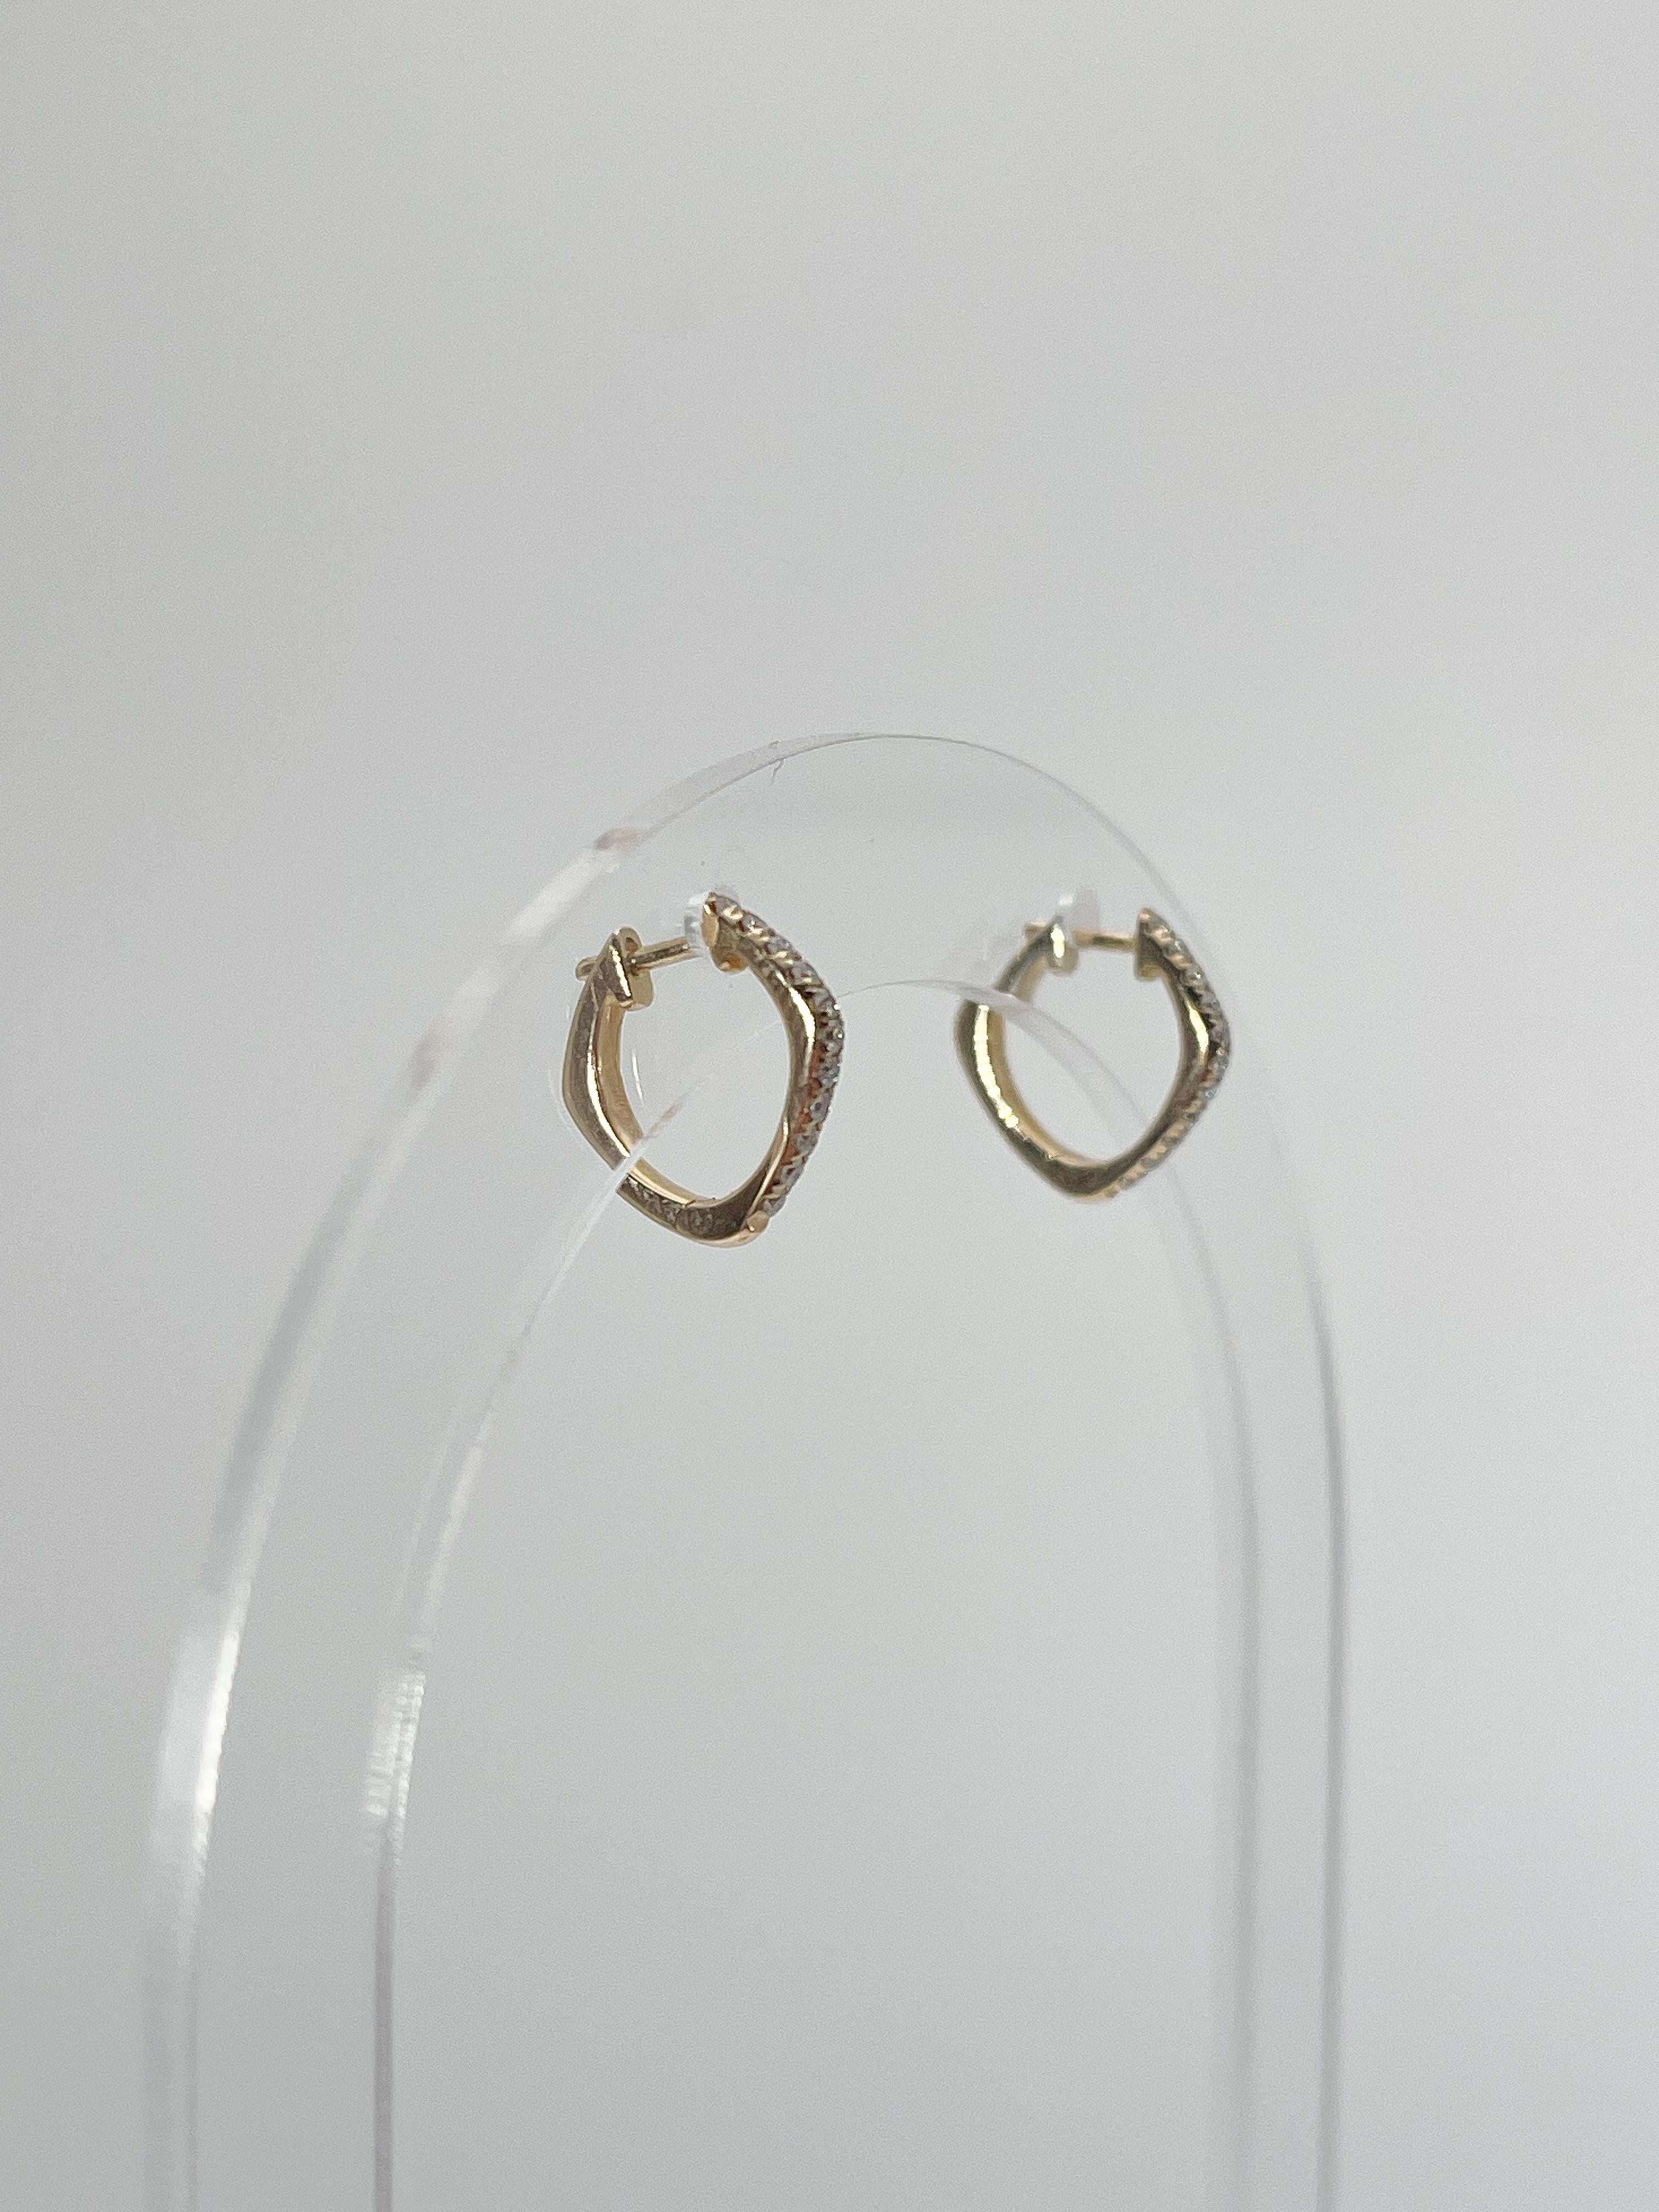 14K Yellow Gold .17 CTW Diamond Squared Hoop Earrings In Excellent Condition For Sale In Stuart, FL